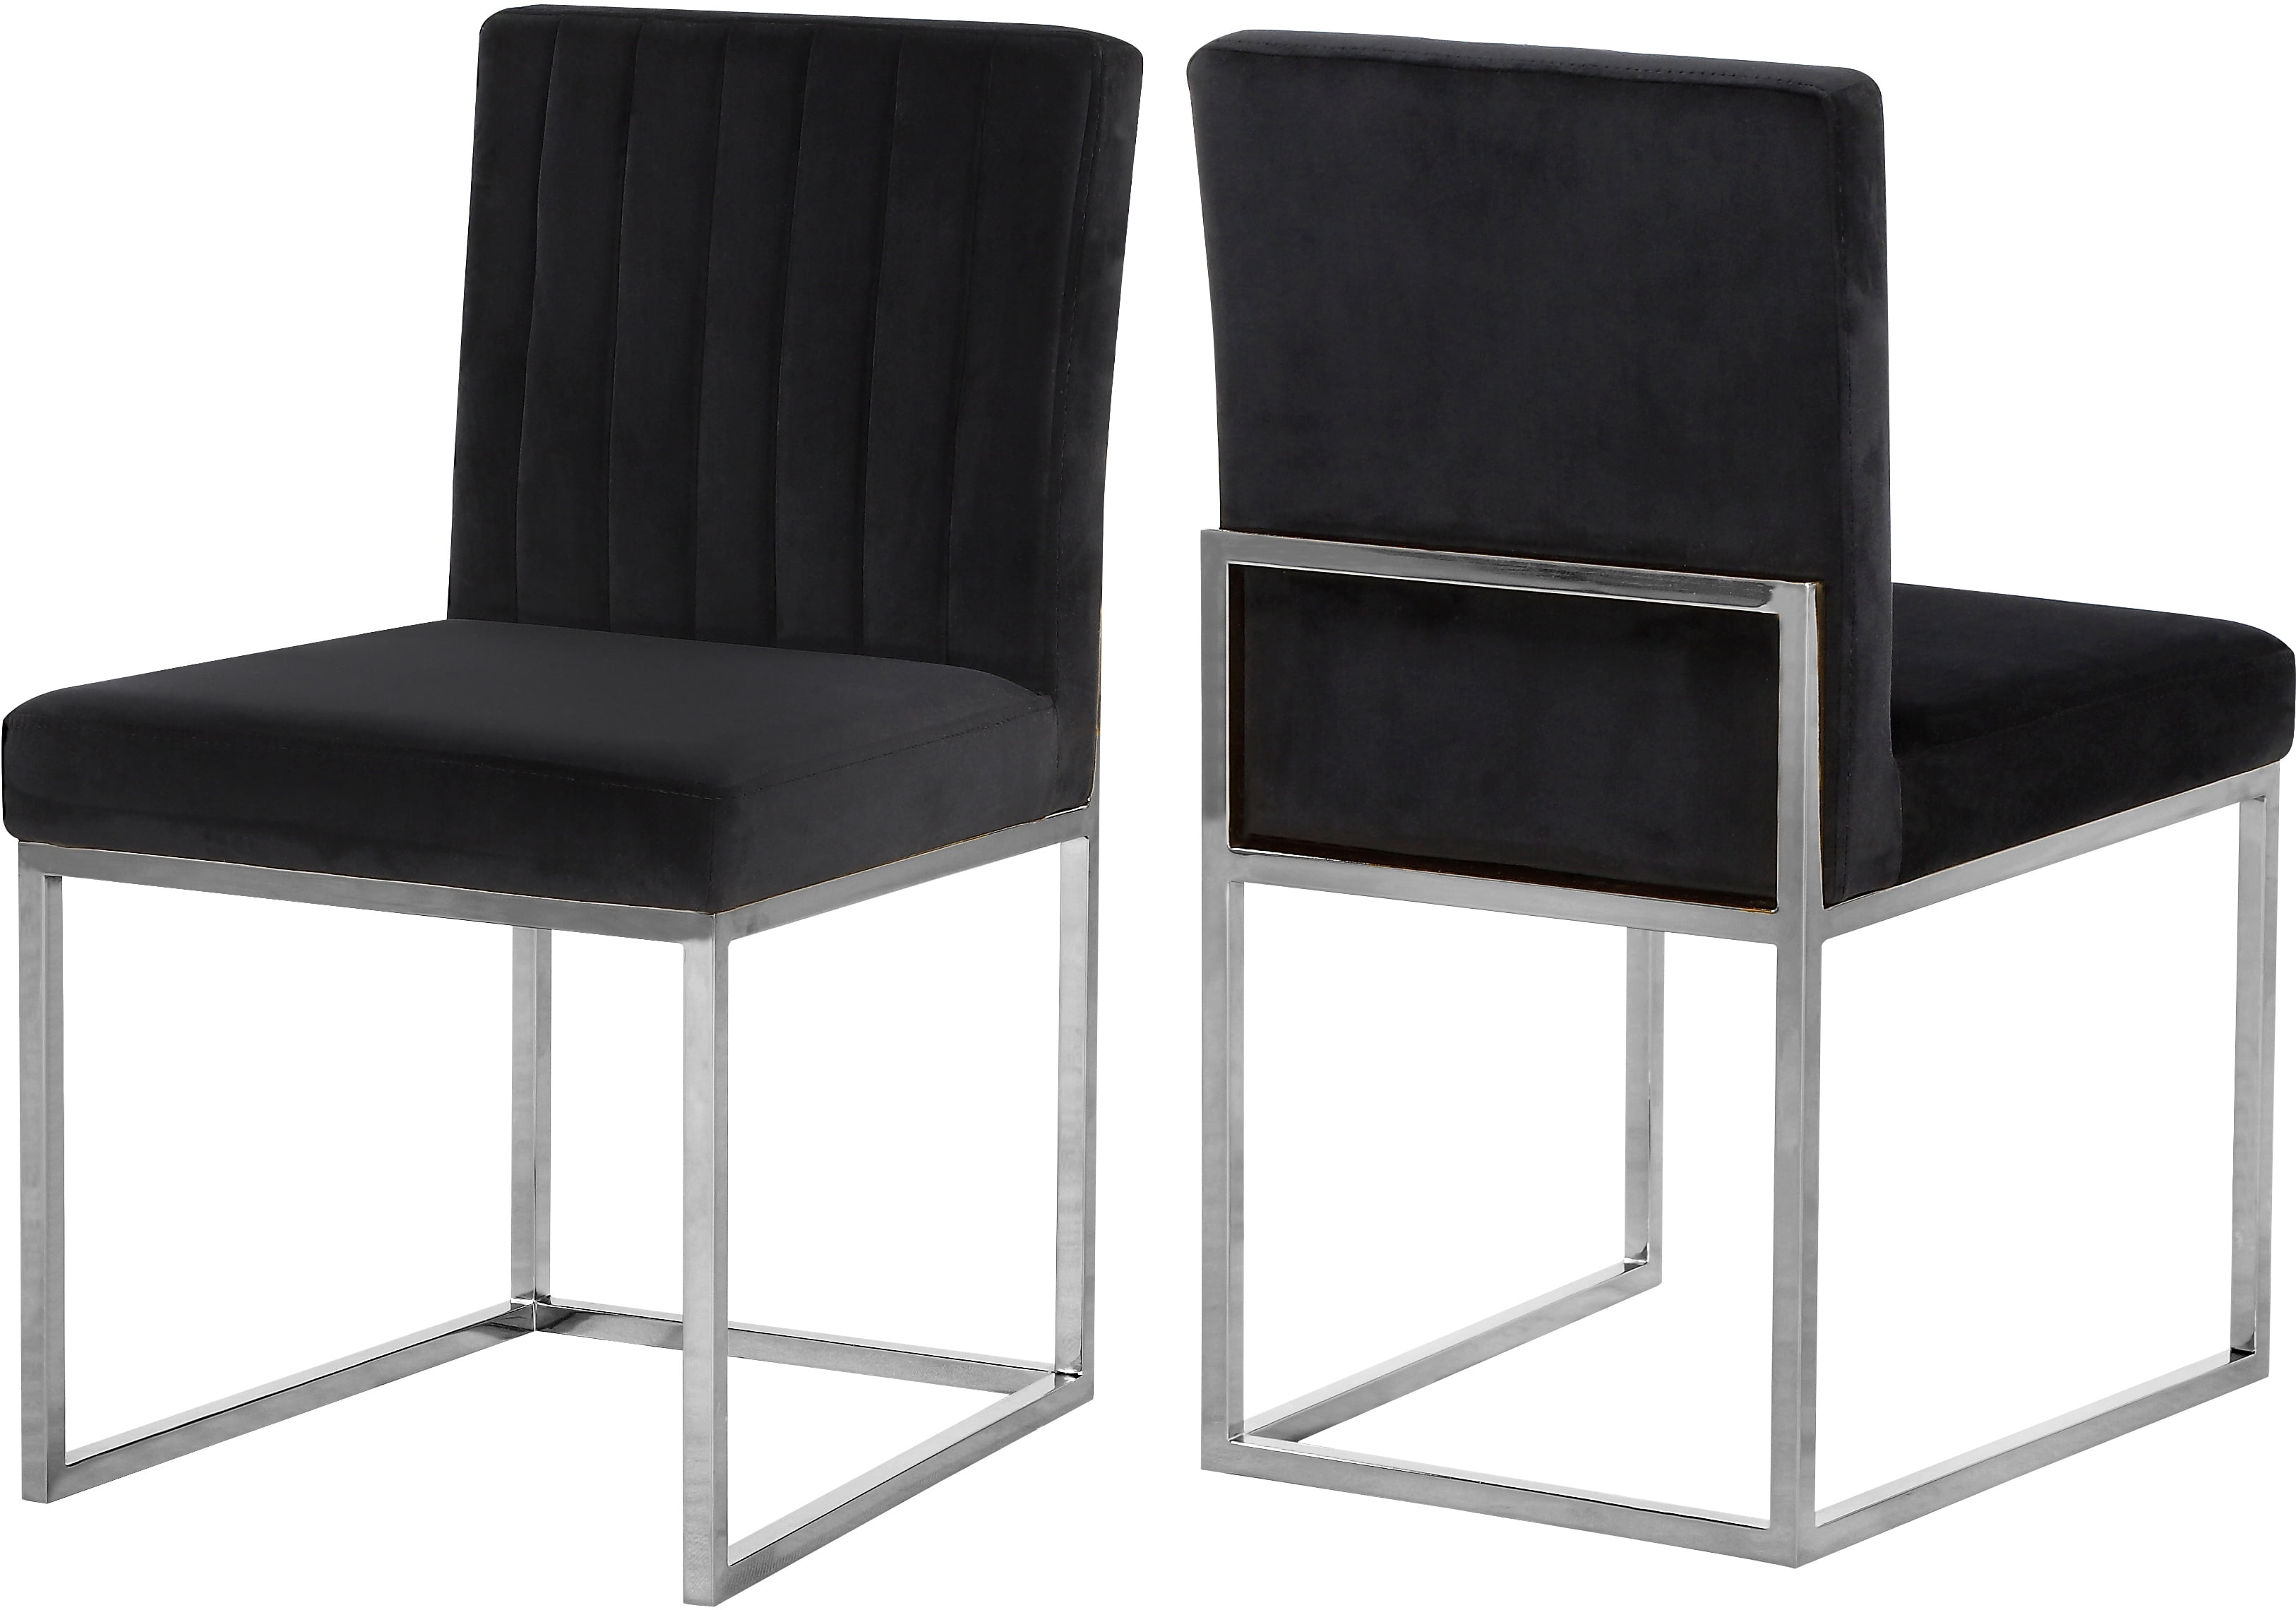 Black And Chrome Dining Room Chairs